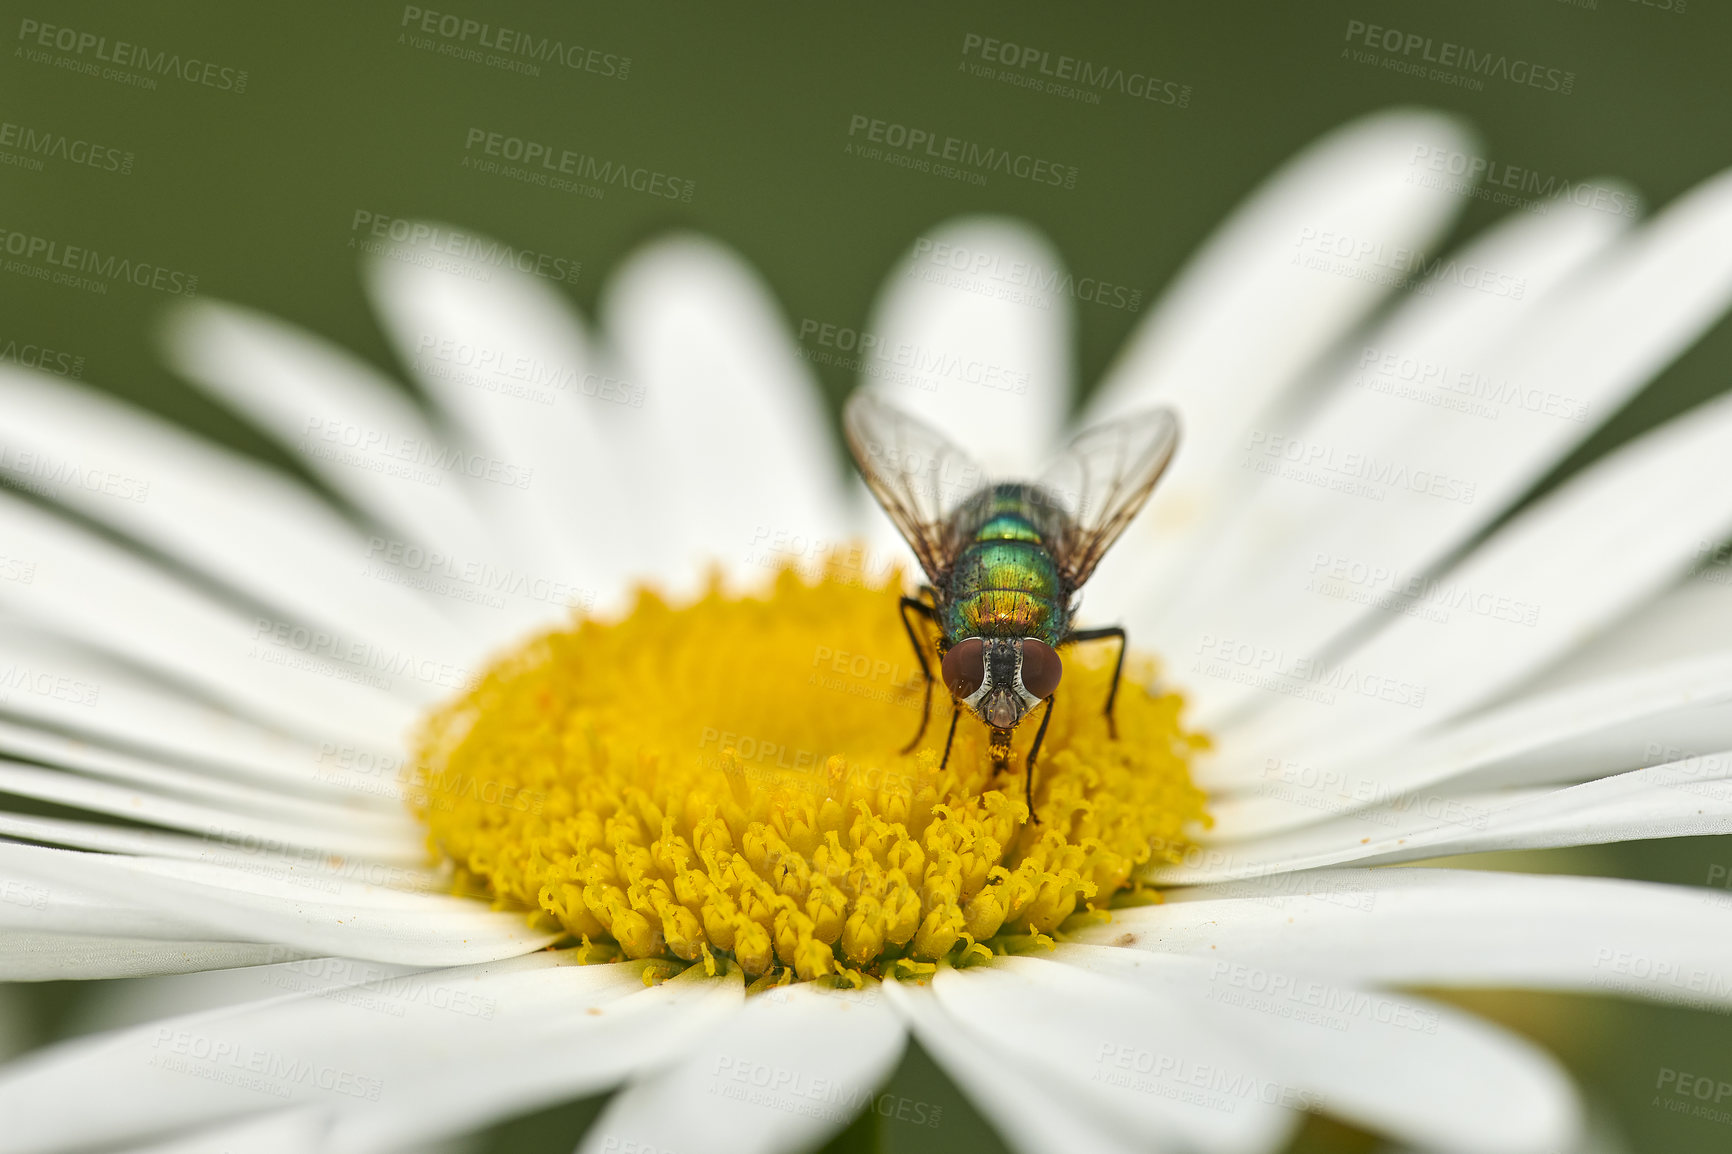 Buy stock photo Closeup of a fly feeding of nectar on a white Marguerite daisy flower in a private or secluded home garden. Macro and texture detail of common green bottle insect pollination and plant pest control